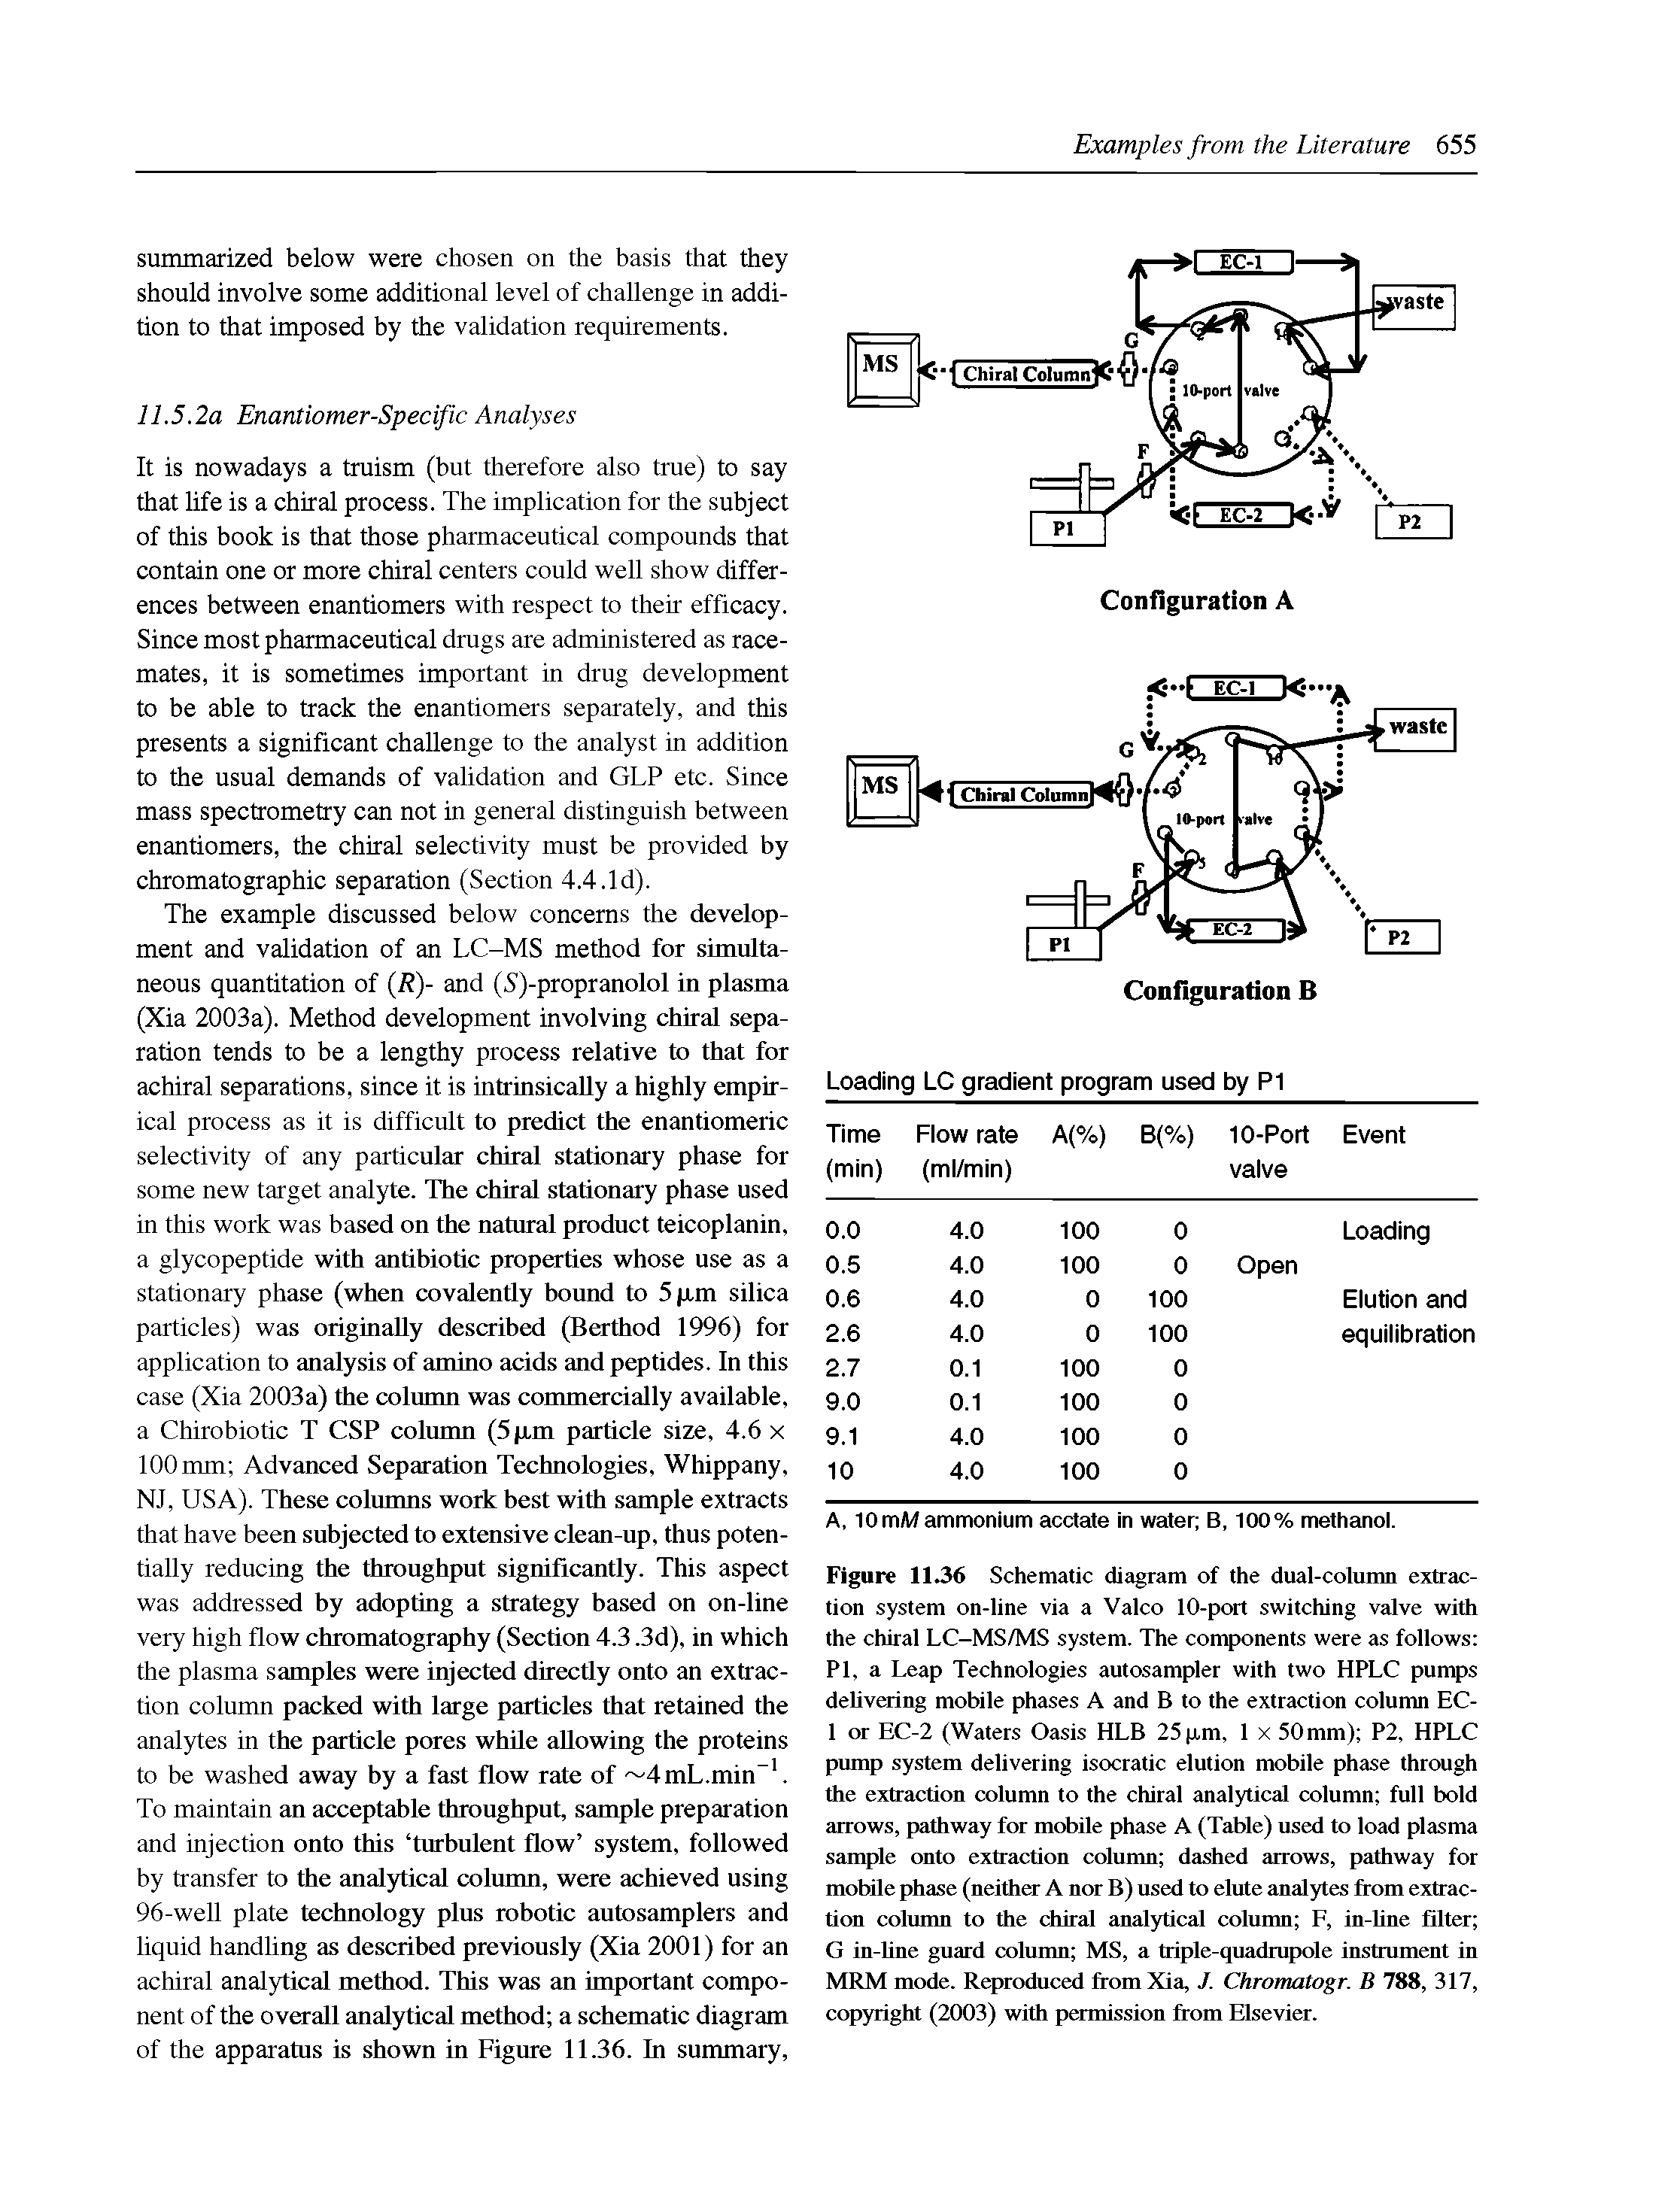 Figure 11.36 Schematic diagram of the dual-column extraction system on-line via a Valeo 10-port switching valve with the chiral LC-MS/MS system. The components were as follows PI, a Leap Technologies autosampler with two HPLC pumps delivering mobile phases A and B to the extraction column EC-1 or EC-2 (Waters Oasis HLB 25 gm, 1 x 50 mm) P2, HPLC pump system delivering isocratic elution mobile phase through the extraction column to the chiral analytical column full bold arrows, pathway for mobile phase A (Table) used to load plasma sample onto extraction column dashed arrows, pathway for mobile phase (neither A nor B) used to elute analytes from extraction column to the chiral analytical column F, in-line filter G in-line guard column MS, a triple-quadrupole instrument in MRM mode. Reproduced from Xia, J. Chromatogr. B 788, 317, copyright (2003) with permission from Elsevier.